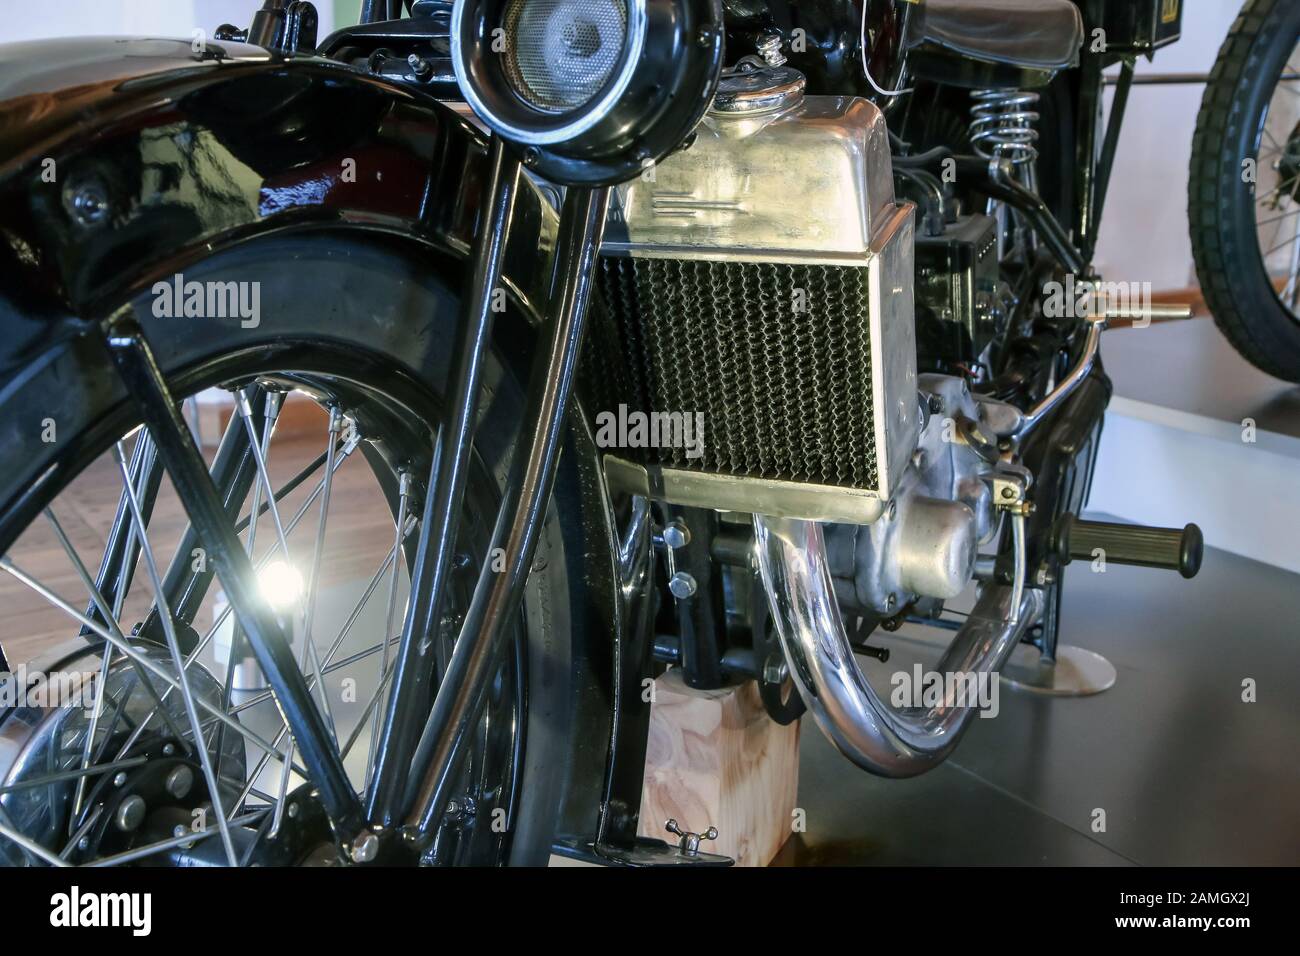 The detail of the old motorcycle with part of the frame, engine, fuel tank, fuel lead and cooler. Stock Photo